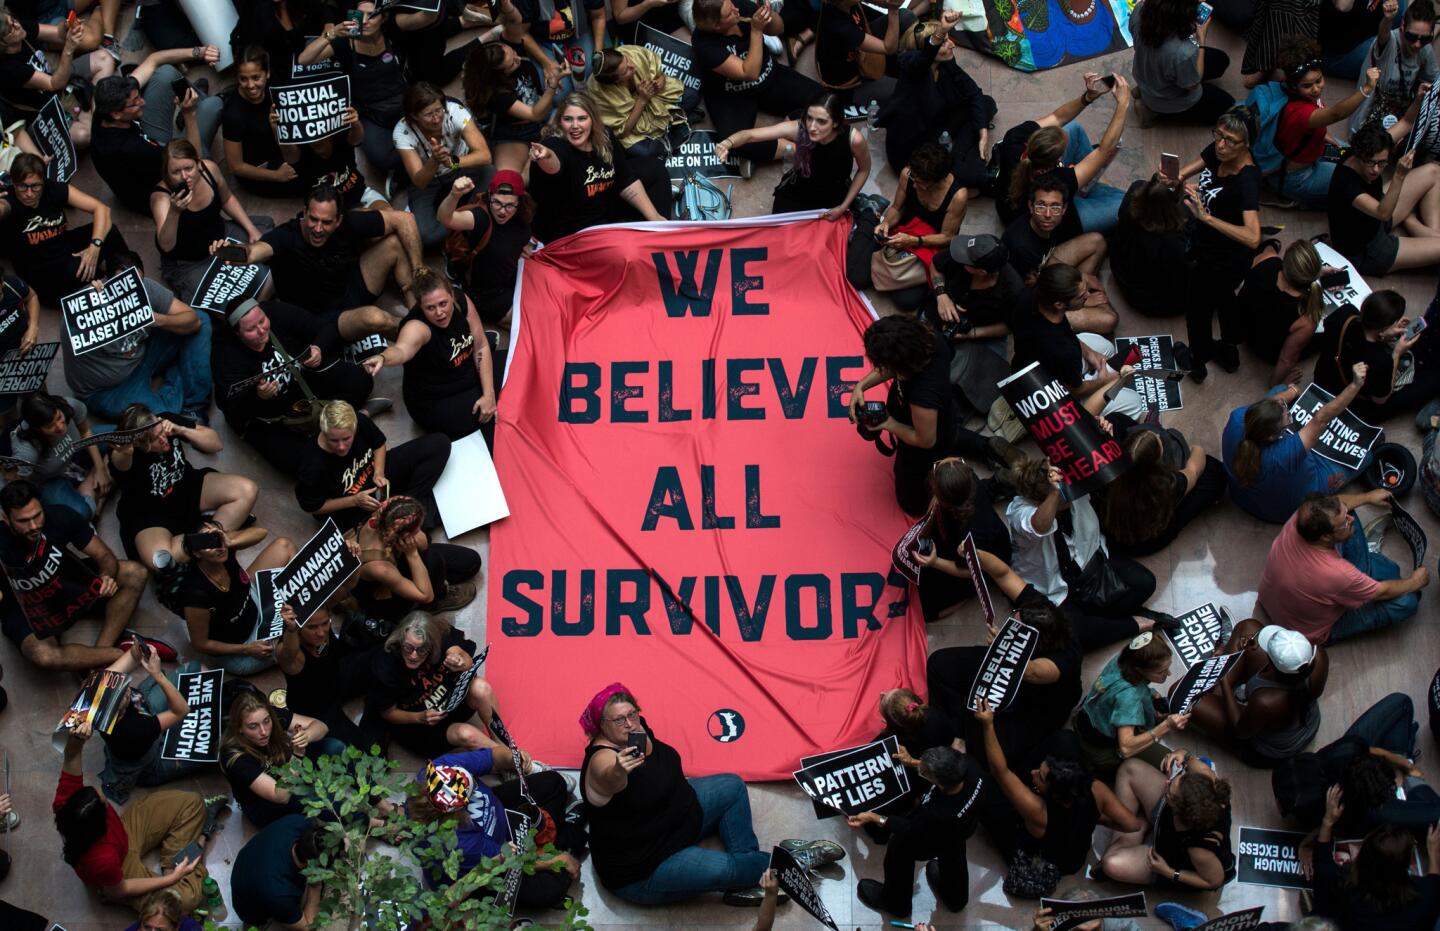 Protesters unfurl a sign as they occupy the Hart Senate Office Building during a rally against Supreme Court nominee Brett Kavanaugh on Capitol Hill.